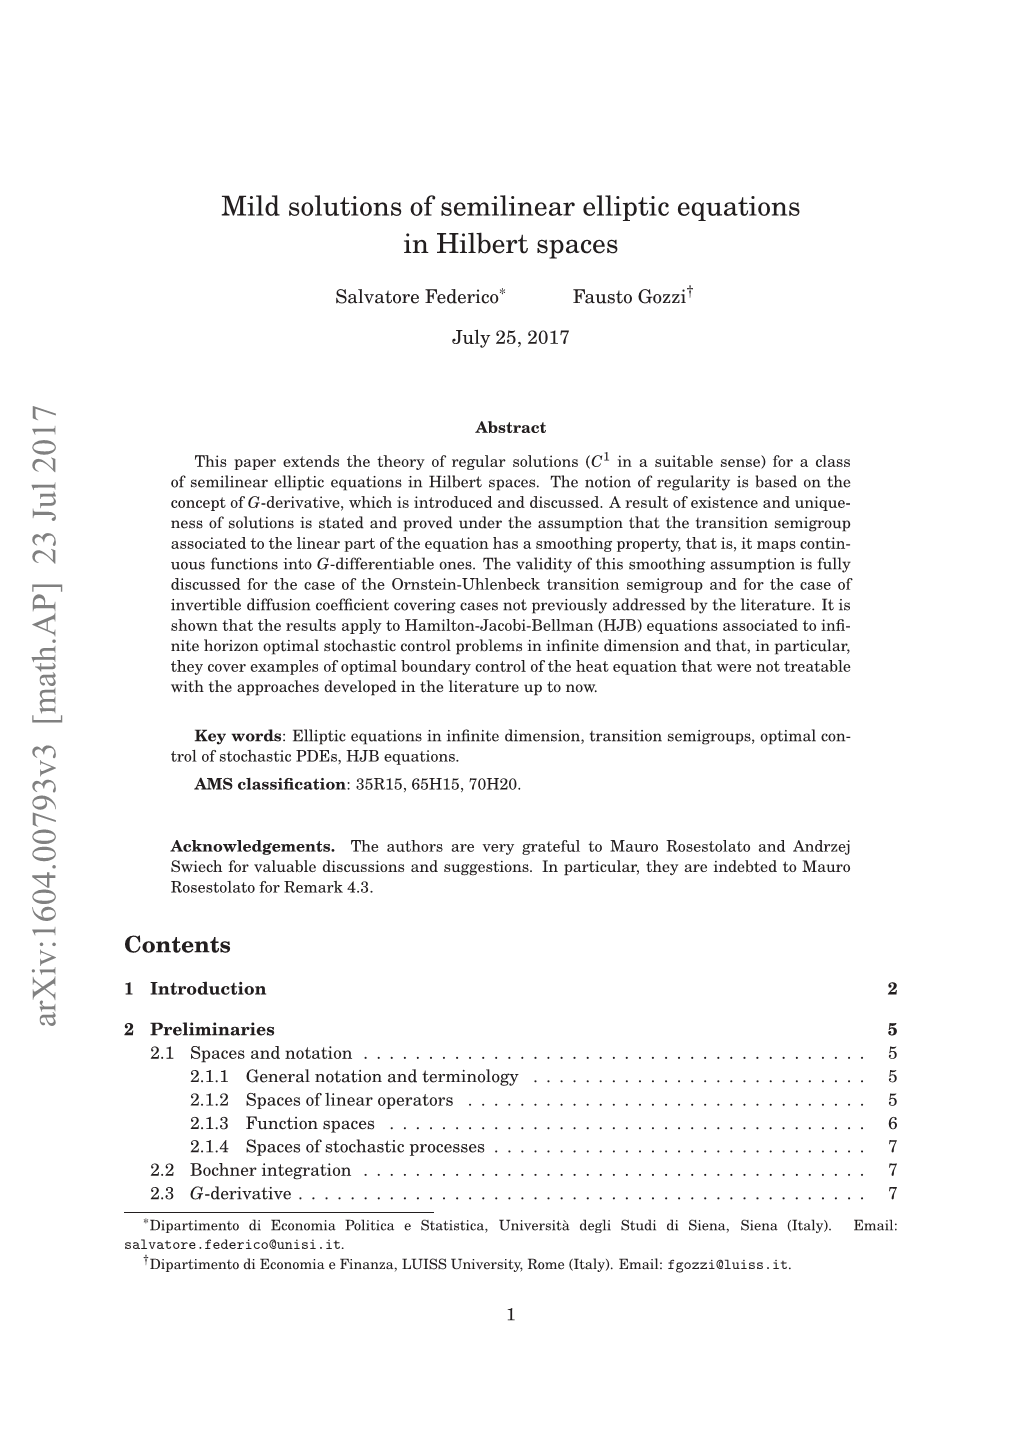 Mild Solutions of Semilinear Elliptic Equations in Hilbert Spaces 13